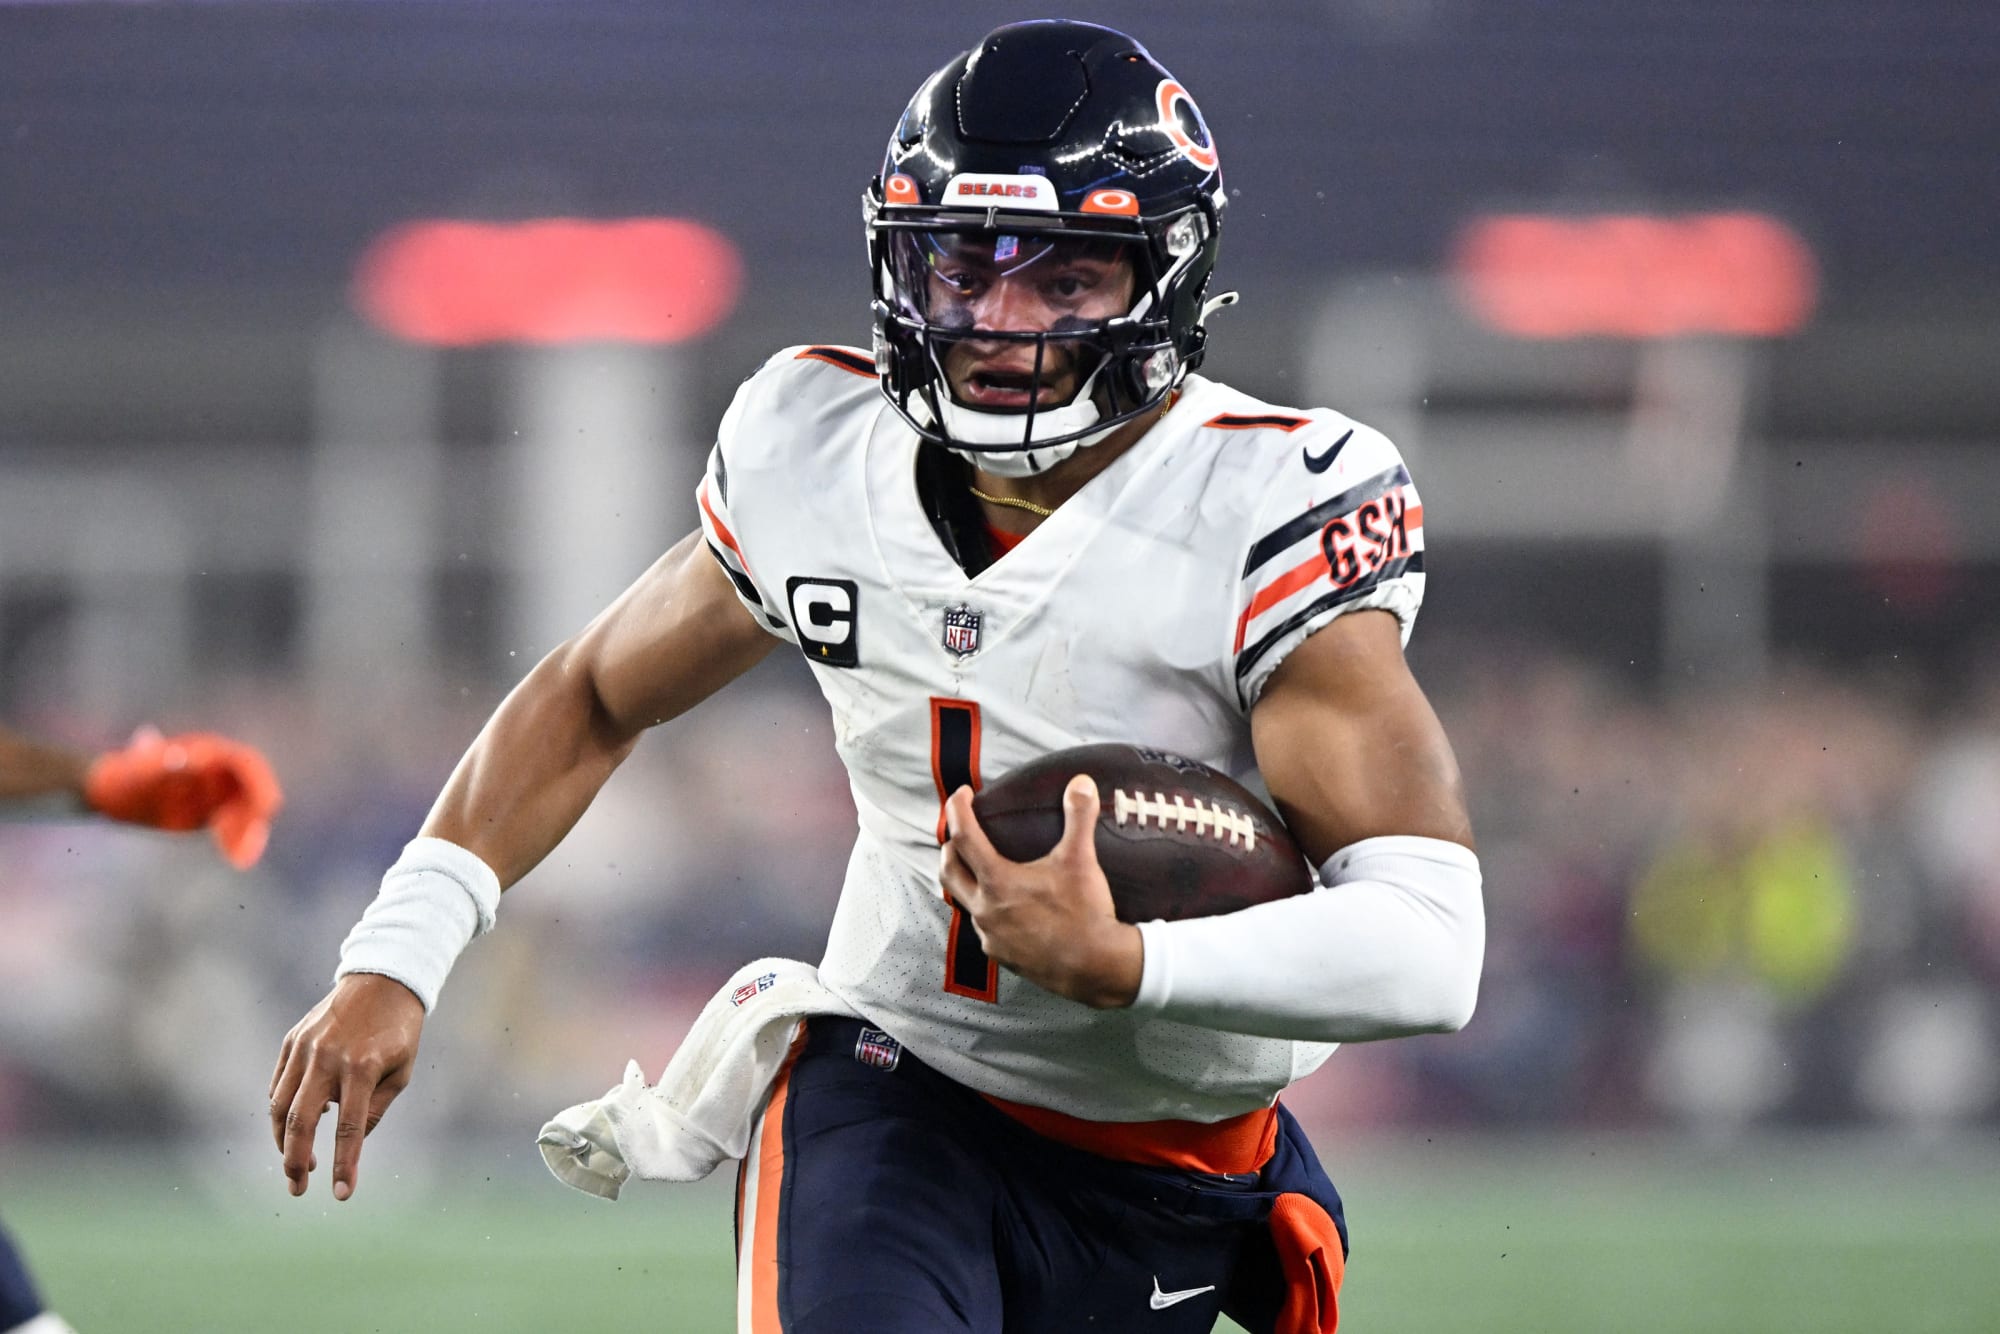 Chicago Bears quarterback, Justin Fields is dominating his draft class